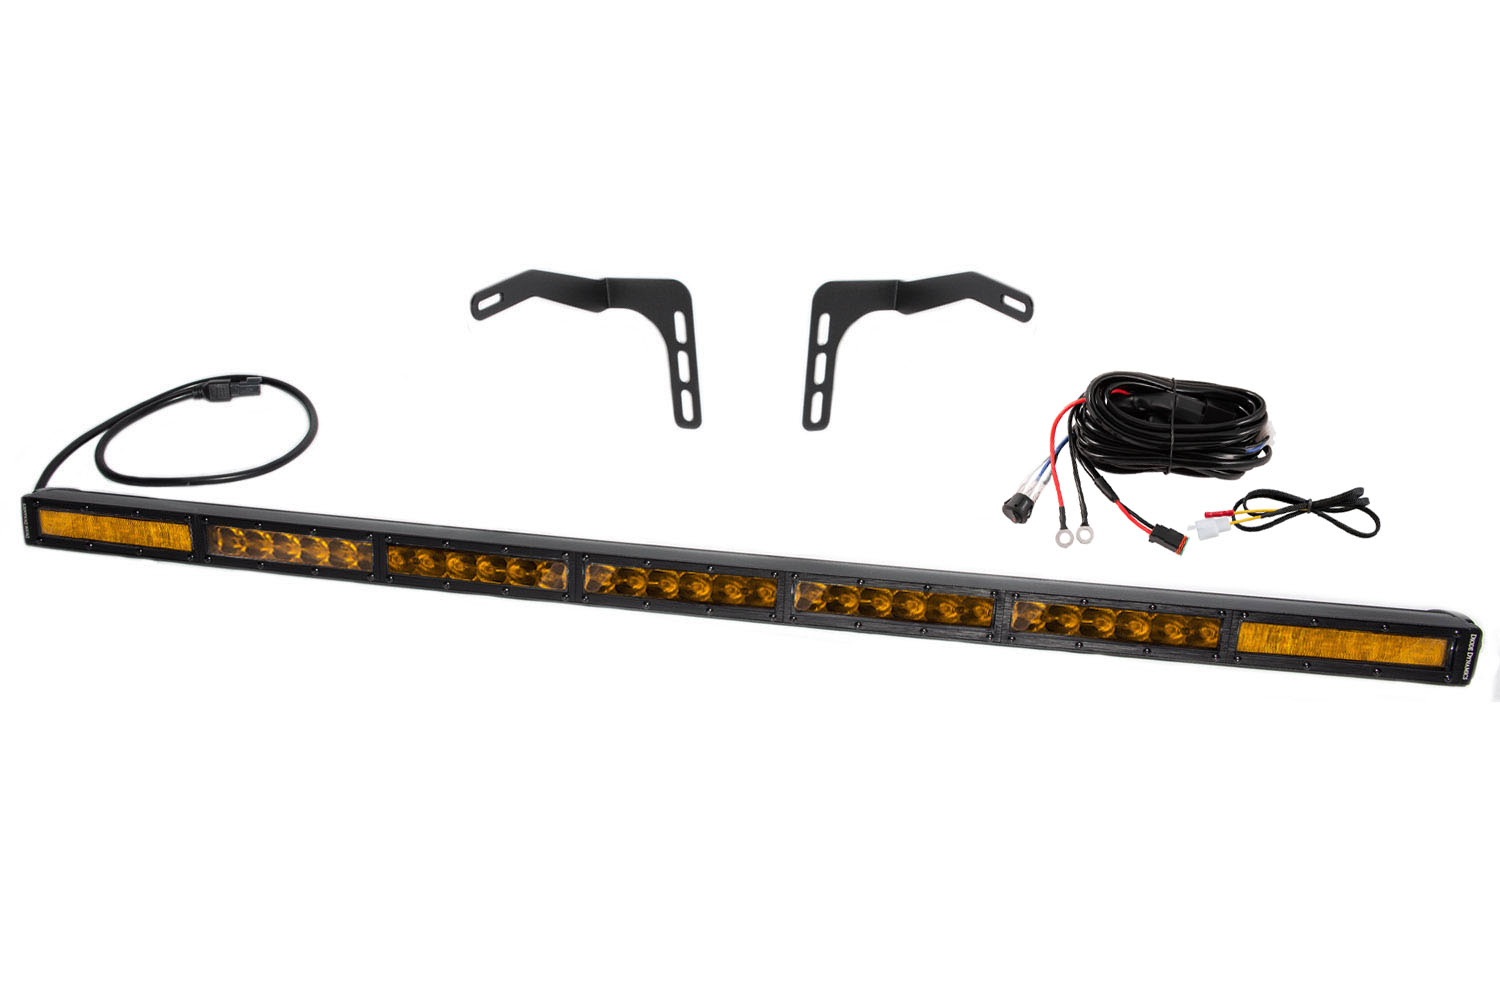 Tundra 42 Inch LED Lightbar Kit Amber Combo Stealth Series Diode Dynamics